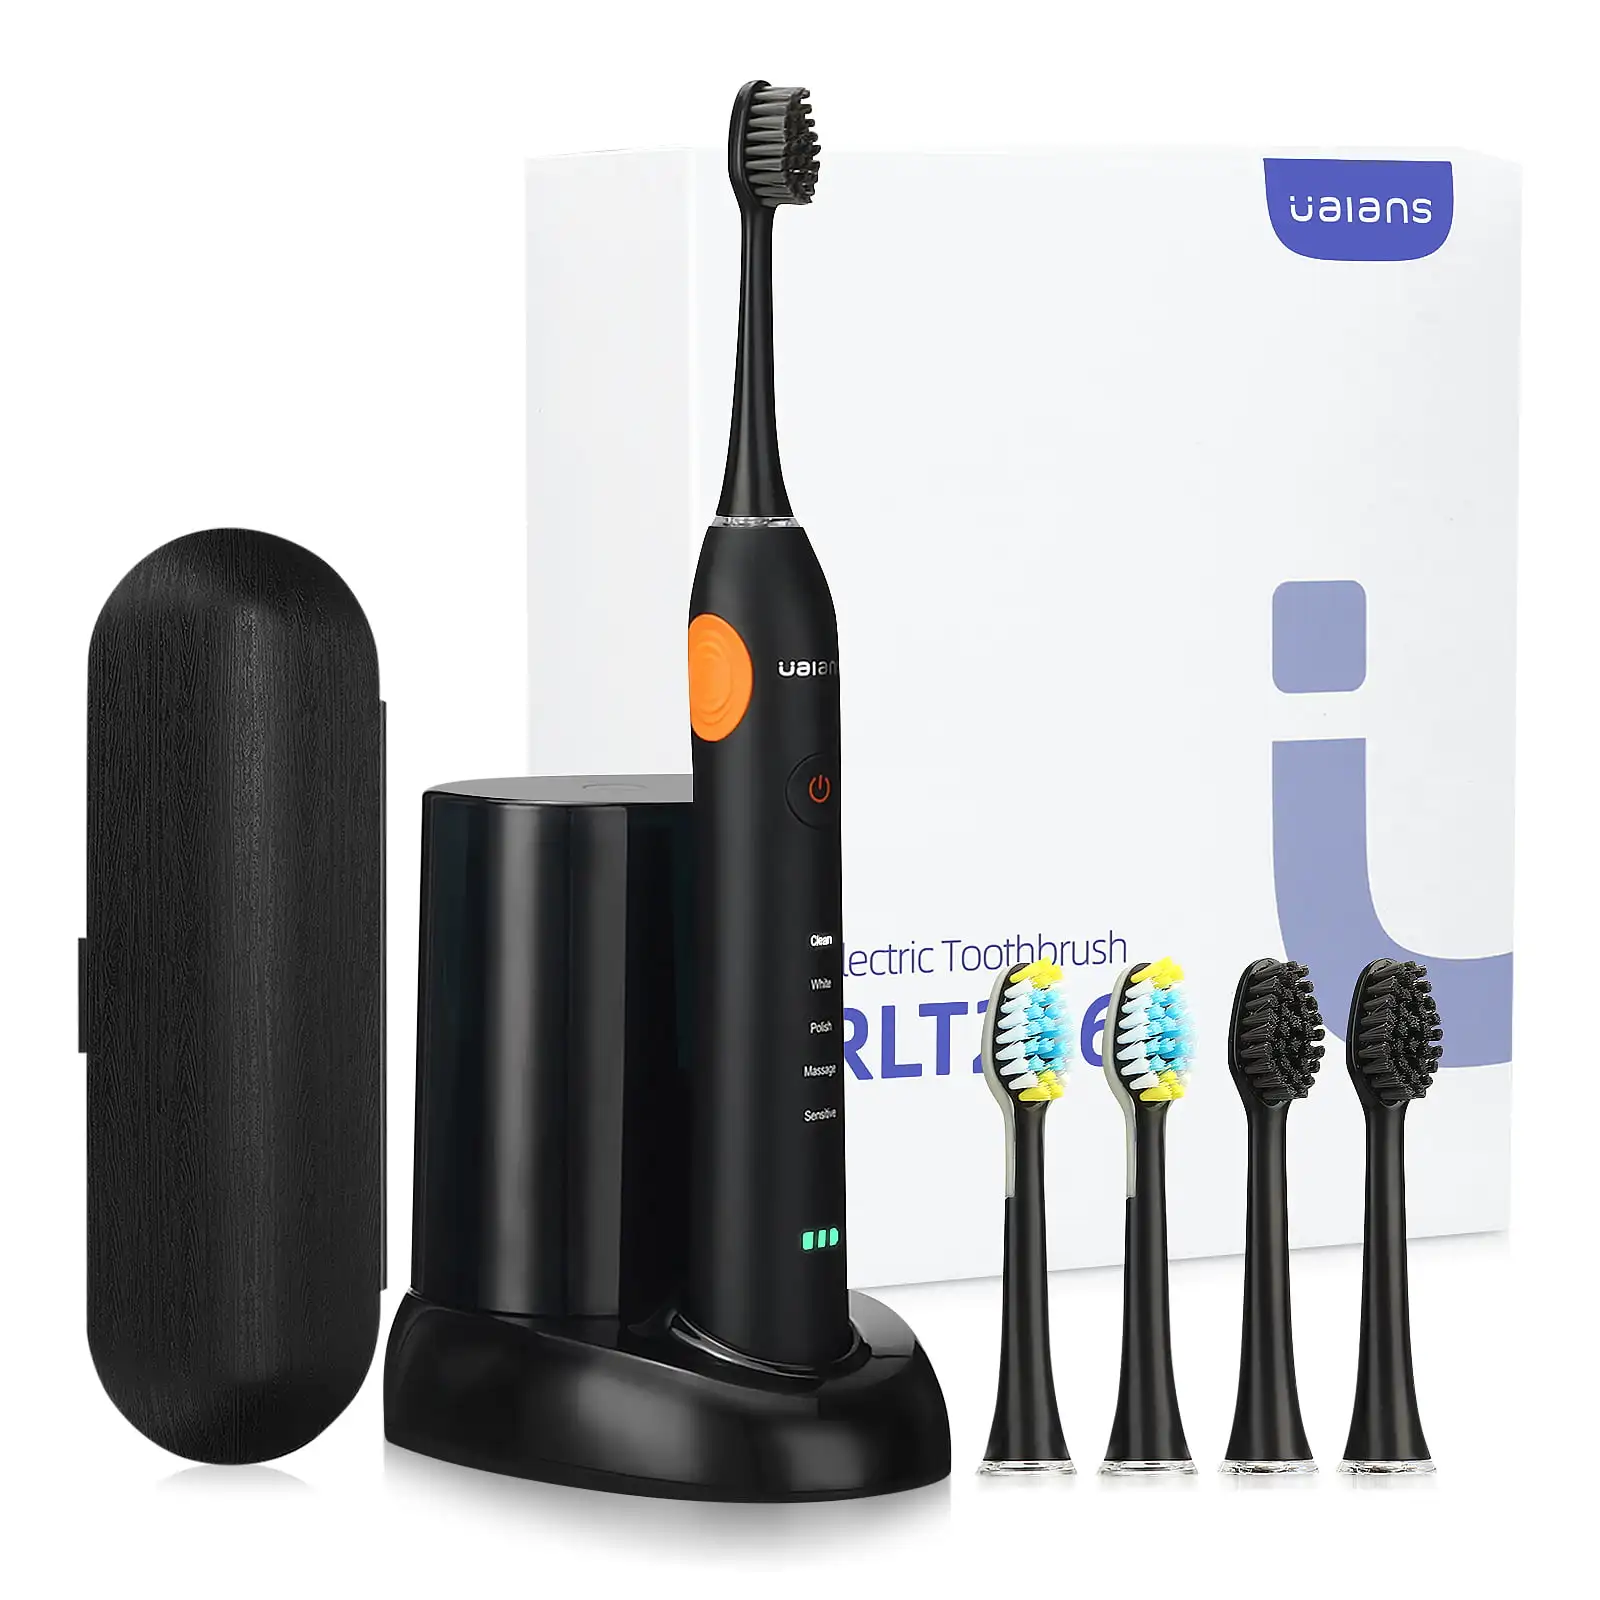 

Toothbrush for Adults, Ualans Sonic Toothbrush With 5 Modes, 4 Brush Heads, 2 Minutes Timer, 48000vpm Rechargeable Toothbrush, T